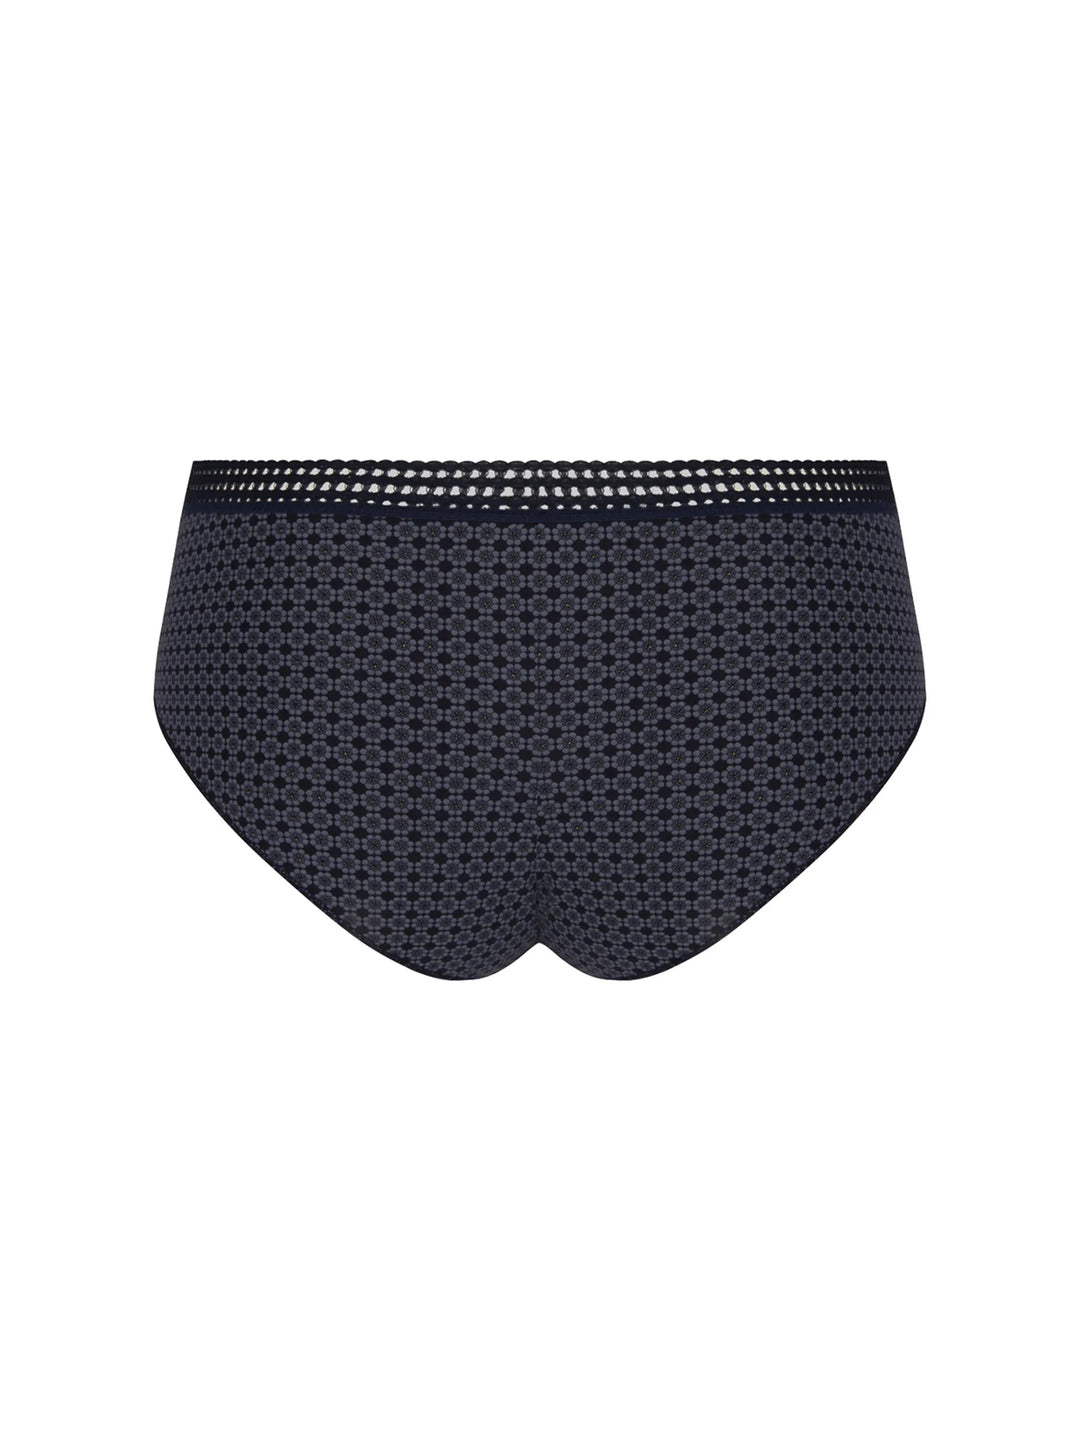 Antigel By Lise Charmel Daily Paillette Boyshort - Shorty vaquero con paillette Antigel by Lise Charmel